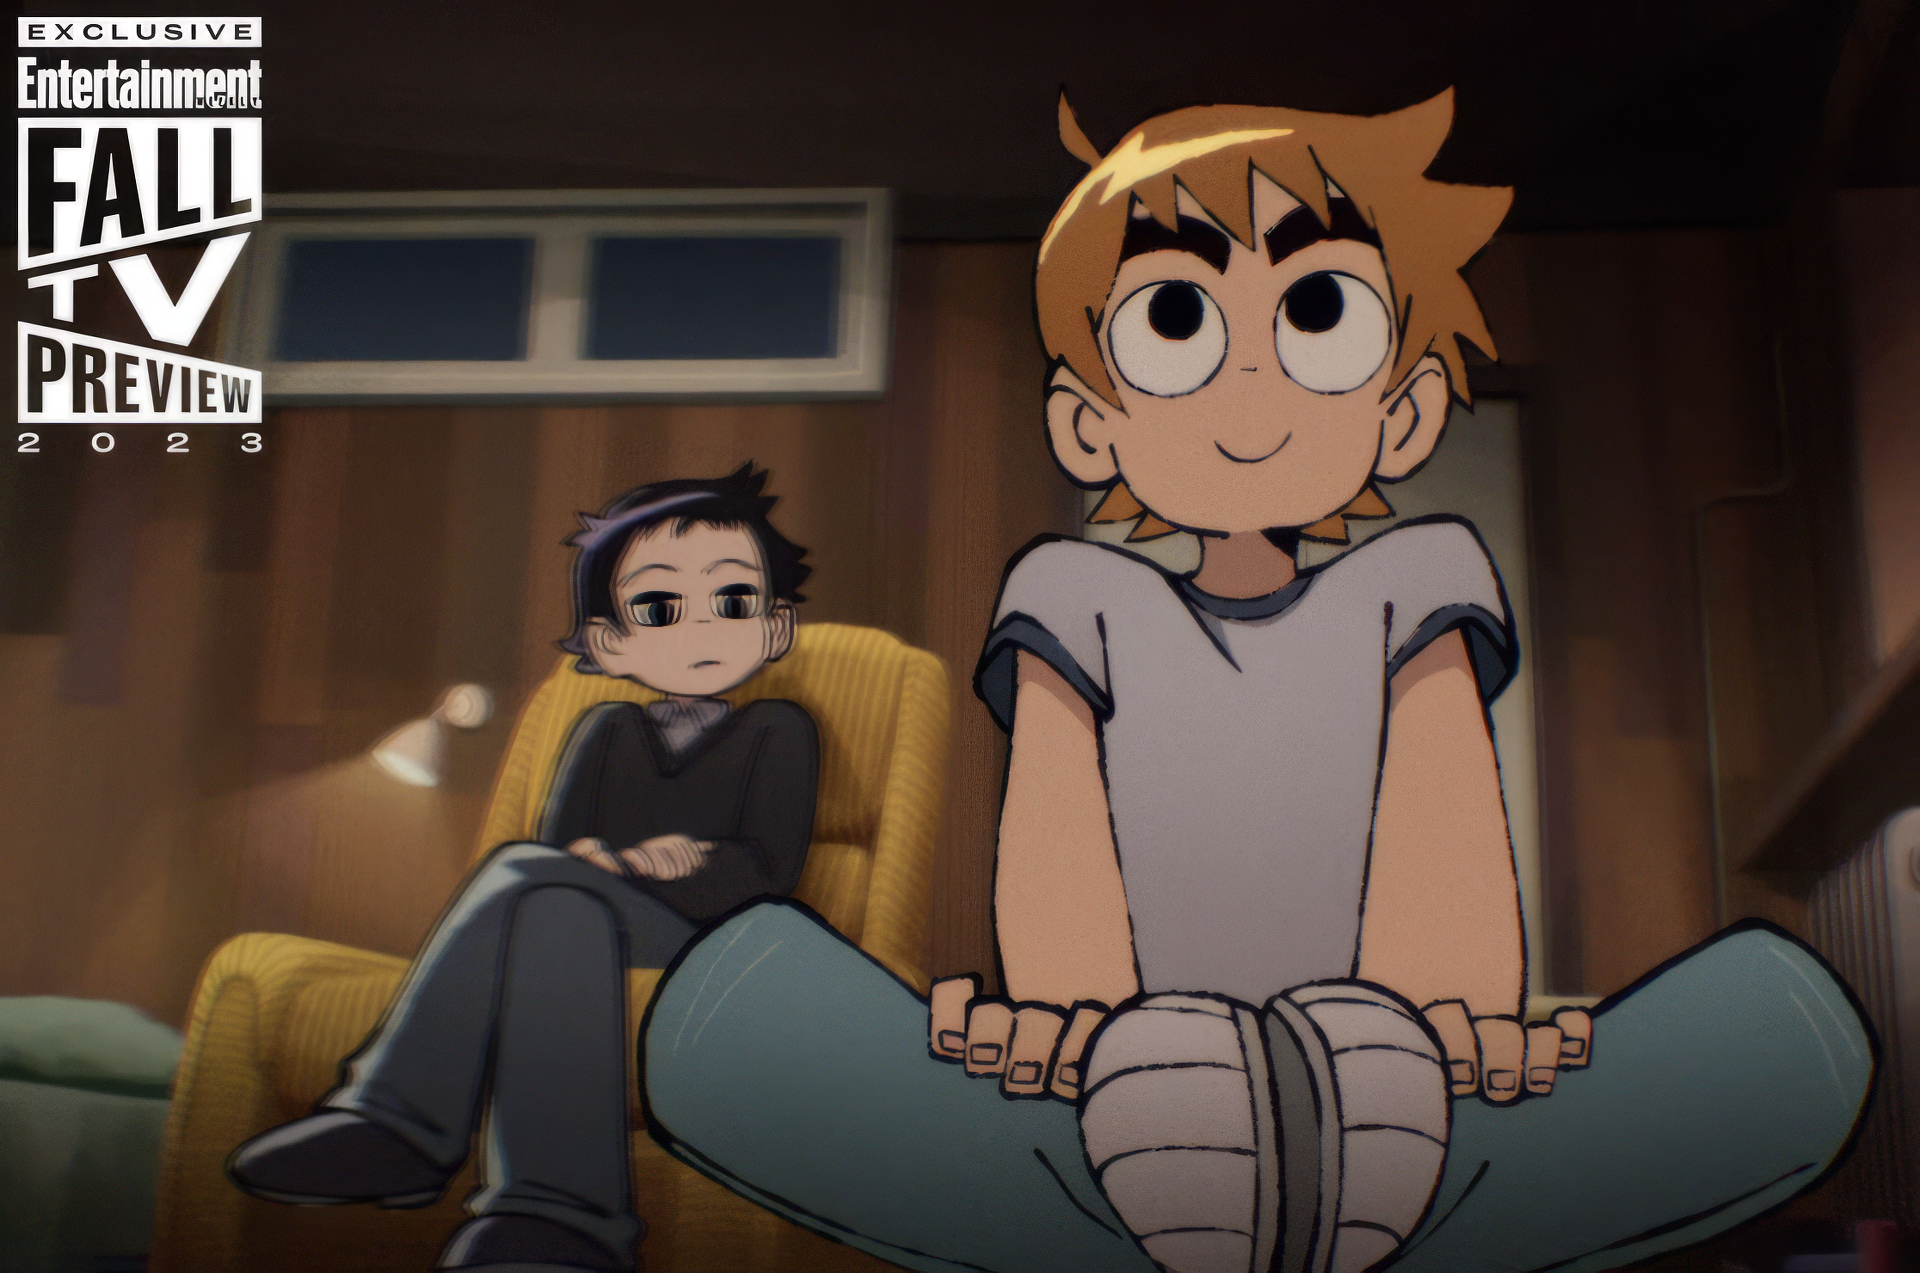 HD wallpaper featuring characters from Scott Pilgrim, with one sitting on the floor and the other on a couch, tagged with Scott Pilgrim Takes Off for the 2022 Fall TV Preview.